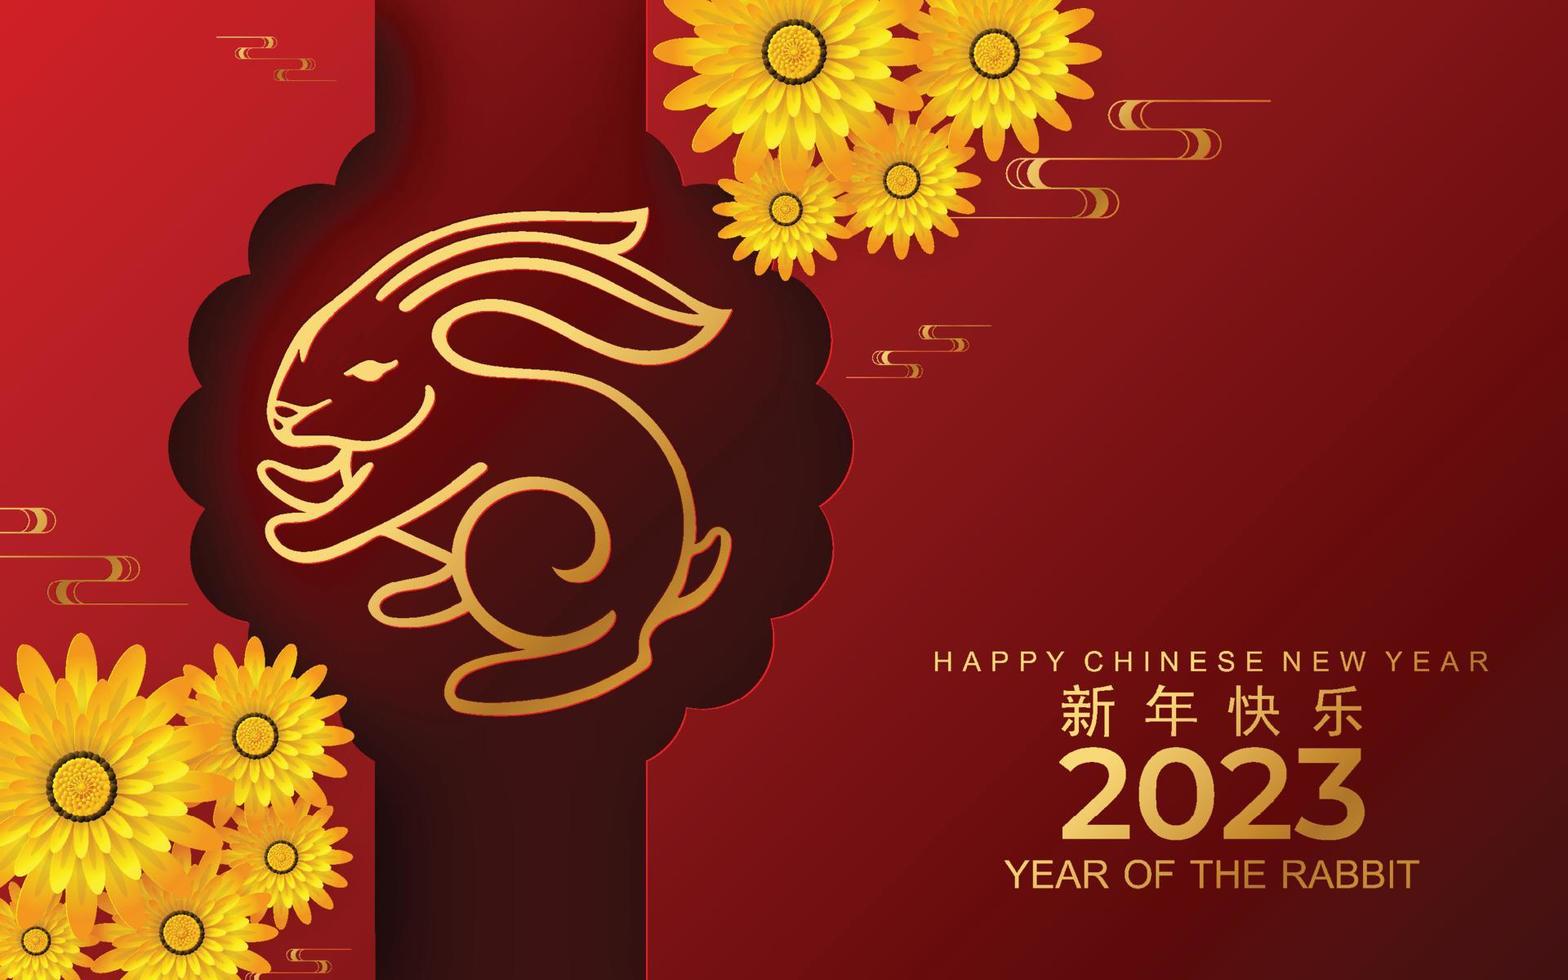 Happy chinese new year 2023 gong xi fa cai year of the rabbit, hares, bunny zodiac sign with flower, lantern, asian elements gold paper cut style on color Background